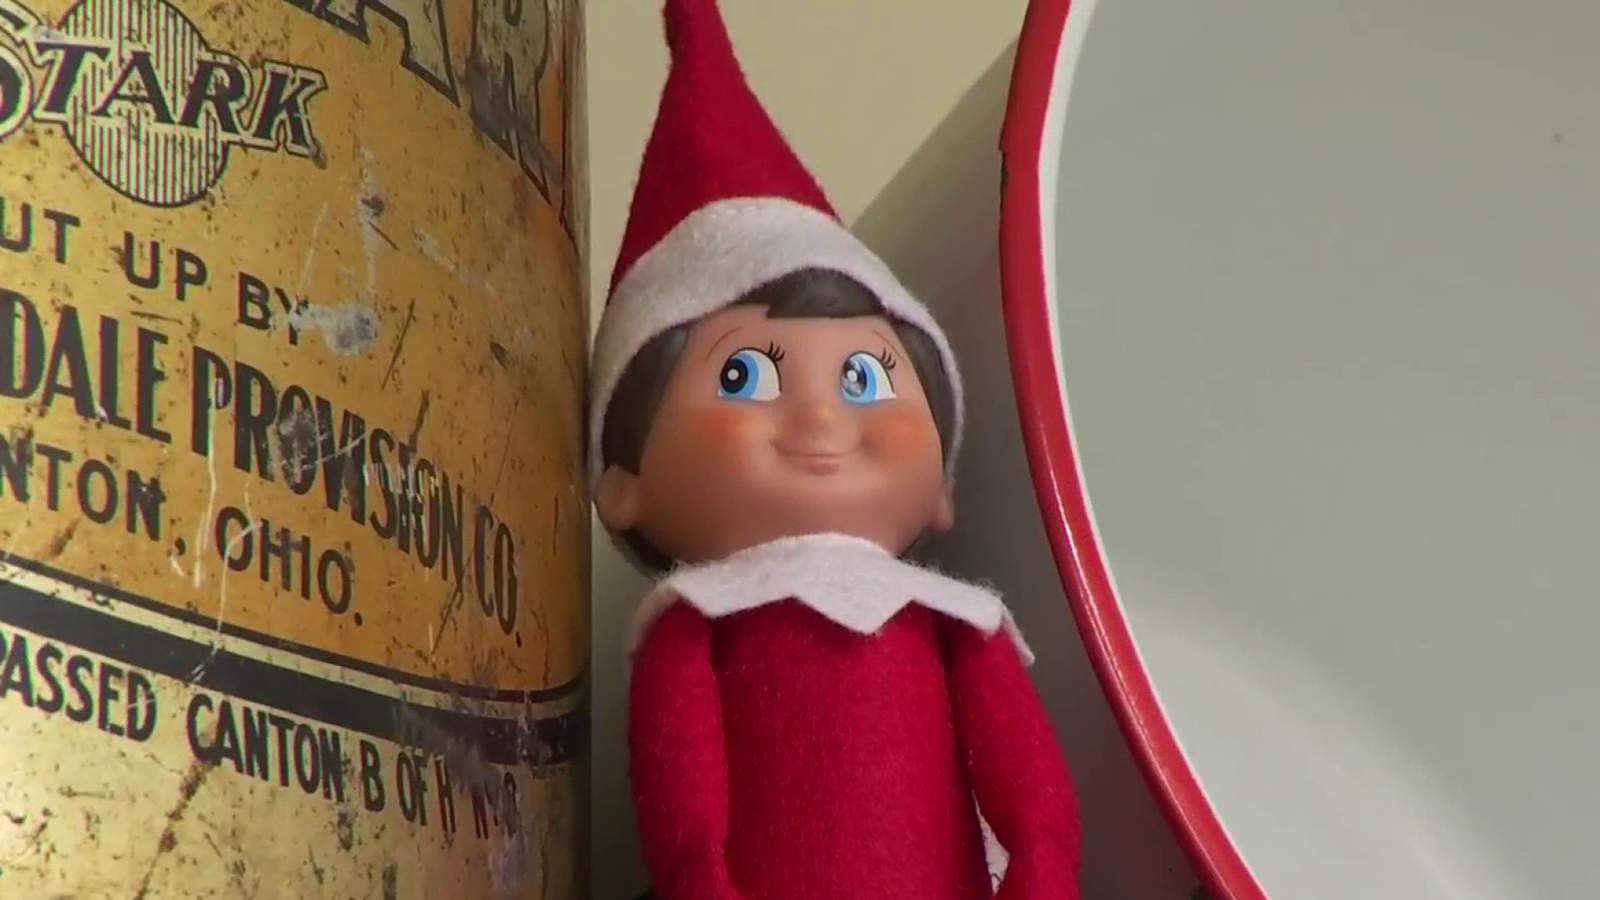 Creative ‘Elf on the Shelf’ display gets ruined after dad turns on oven